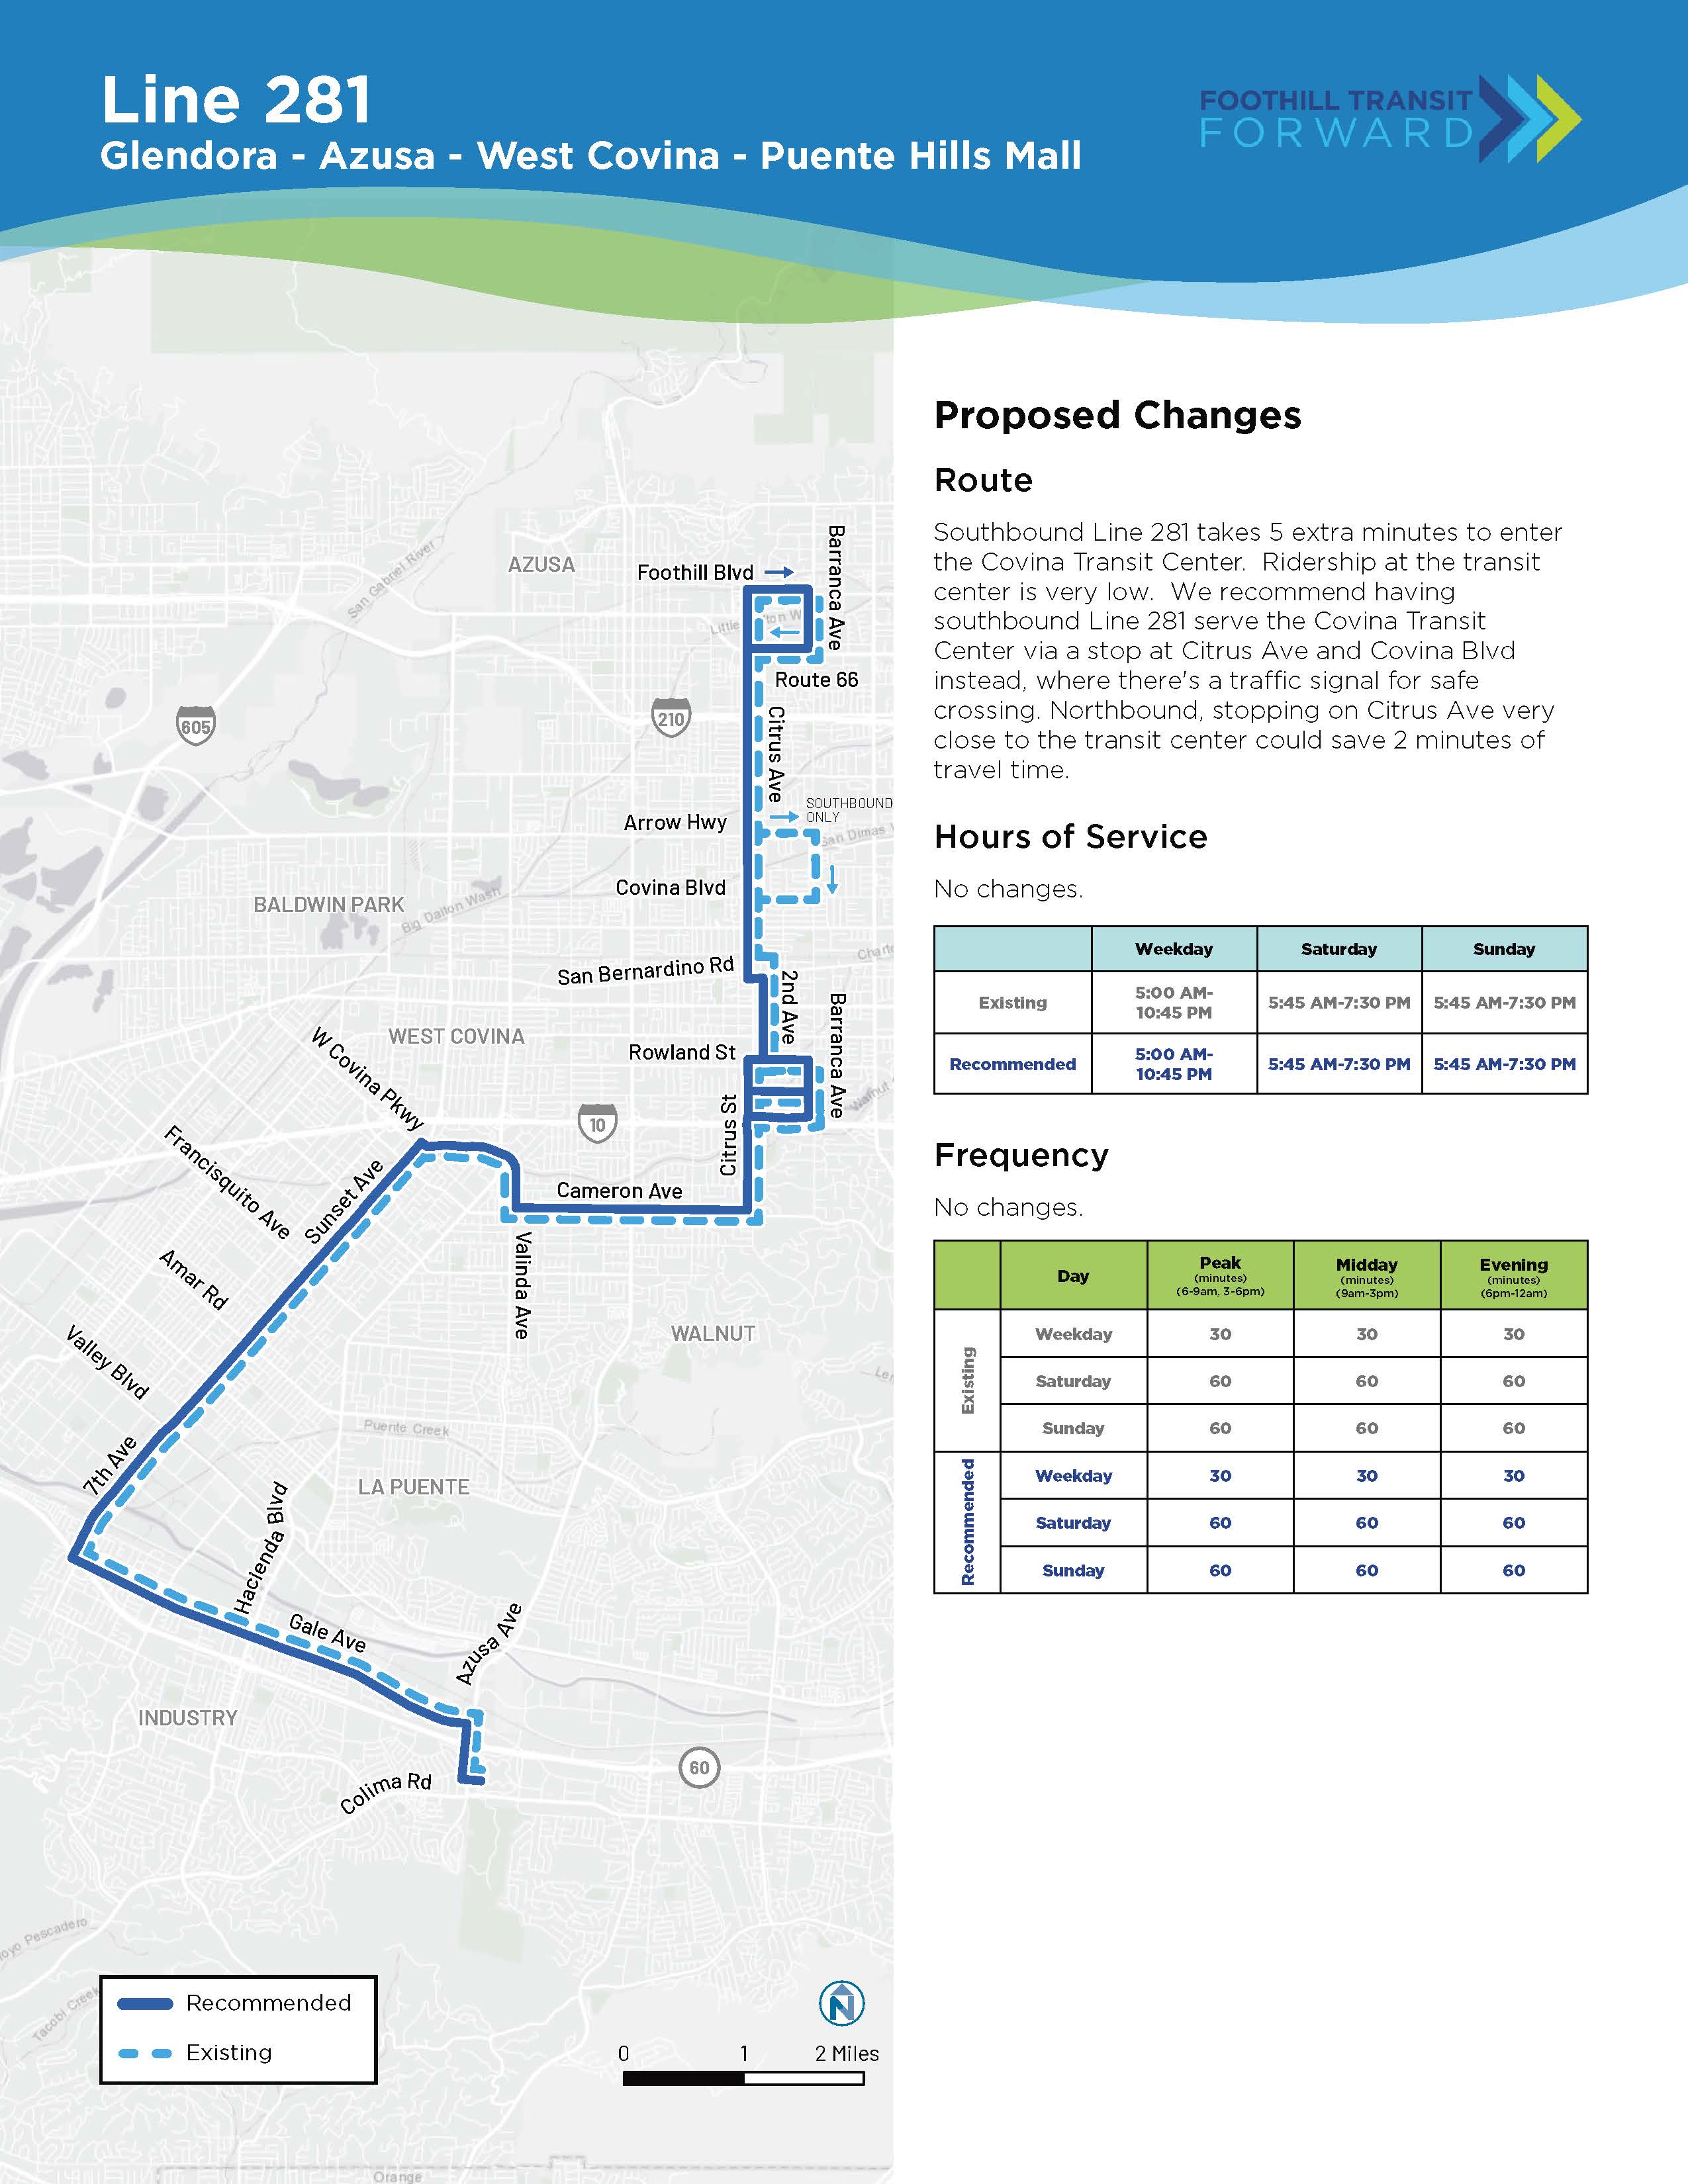 Proposed Changes to Coverage: Southbound Line 281 makes a 5 minute deviation to the Covina Transit Center. Ridership is very low there. Southbound Line 281 could stop near the center at Citrus Ave/Covina Blvd by a traffic signal. Northbound Line 281 could also be adjusted to save 2 minutes of travel time. It could stop on Citrus Ave 100 yards from the transit center platform. Many customers will benefit from better reliability and faster travel times. No changes to Hours of Service or frequency.